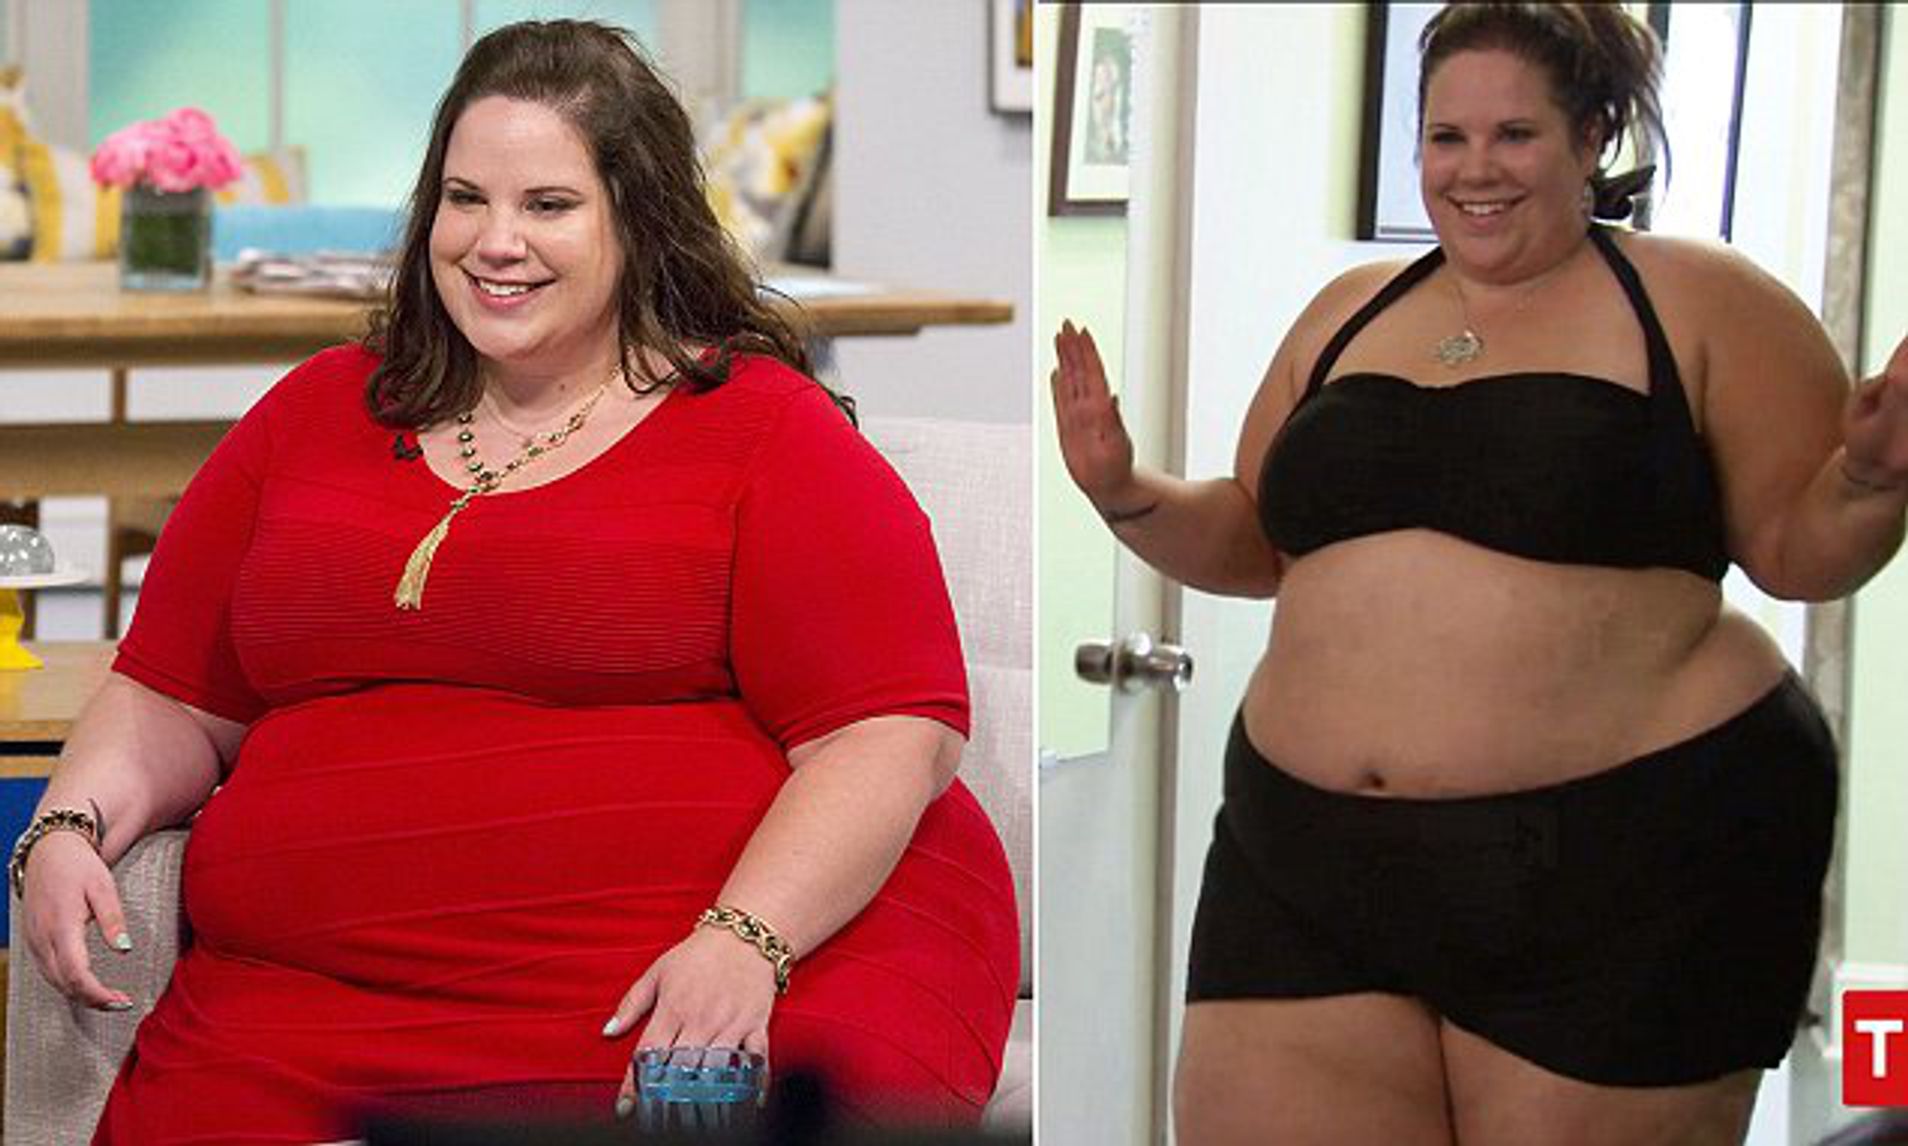 cynthia keating recommends fat girl dancing youtube pic